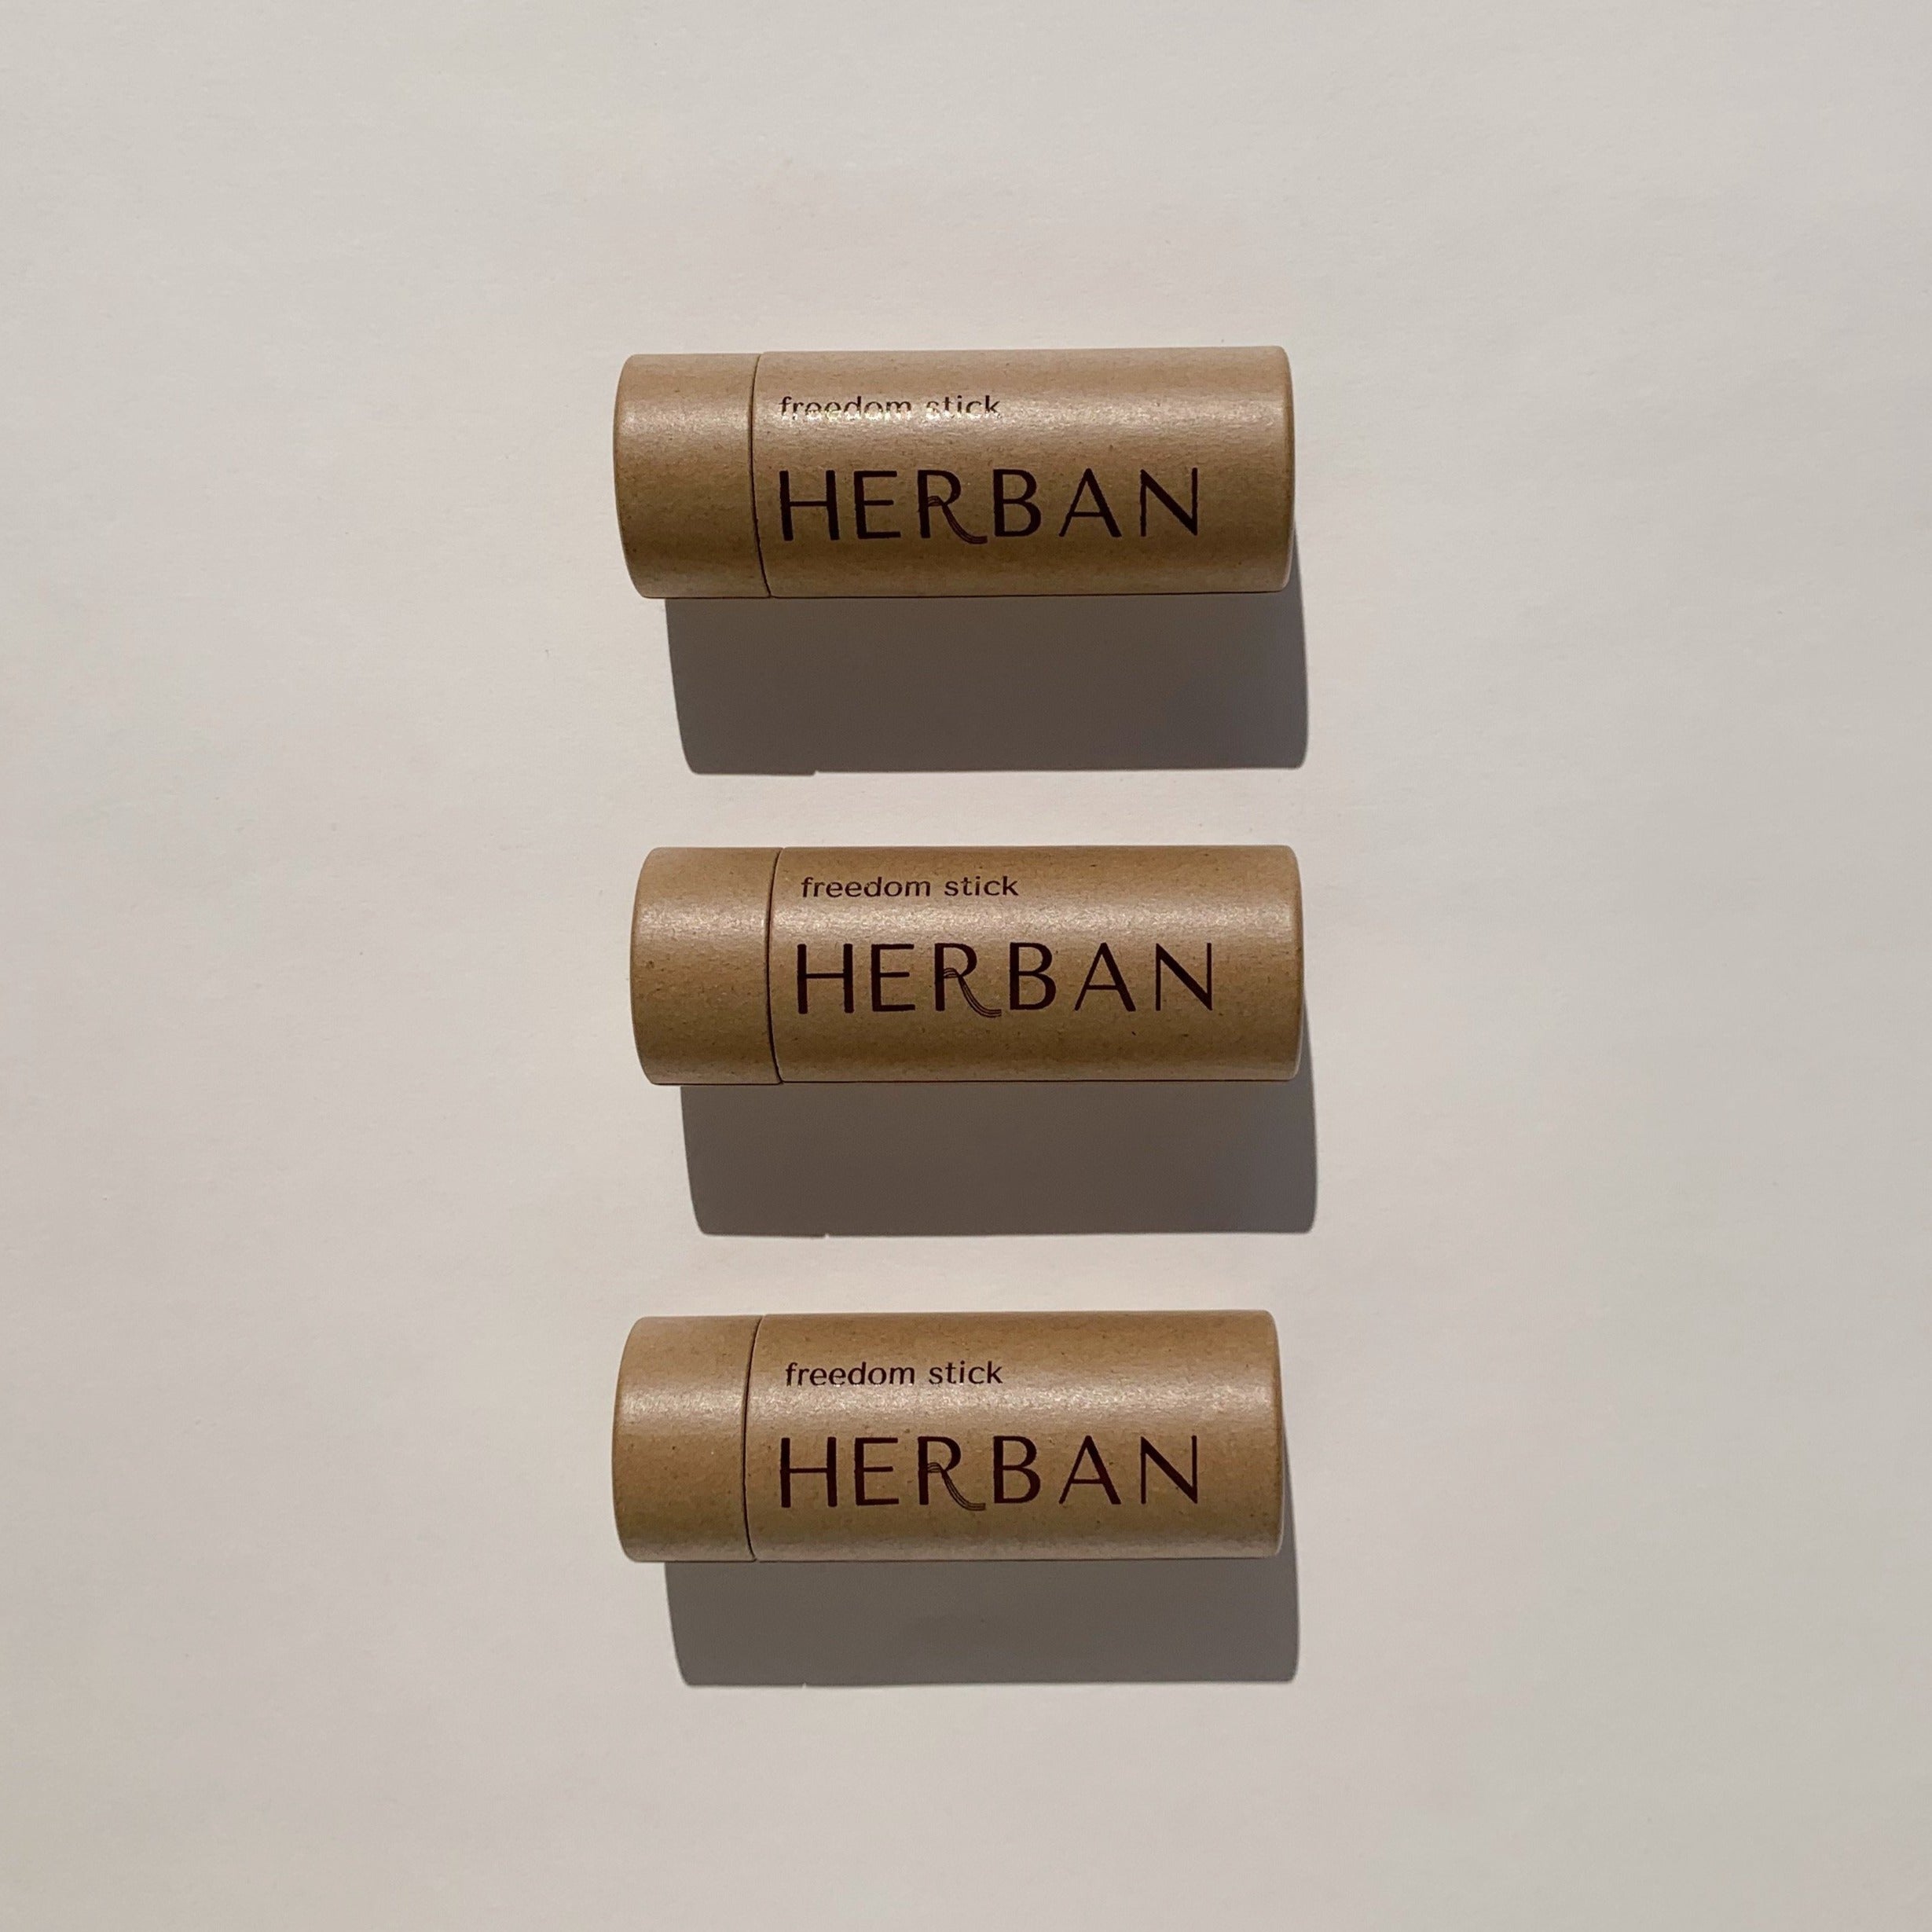 3 of Herban's Freedom Stick in plastic free, compostable packaging and is Aluminum and Baking soda free